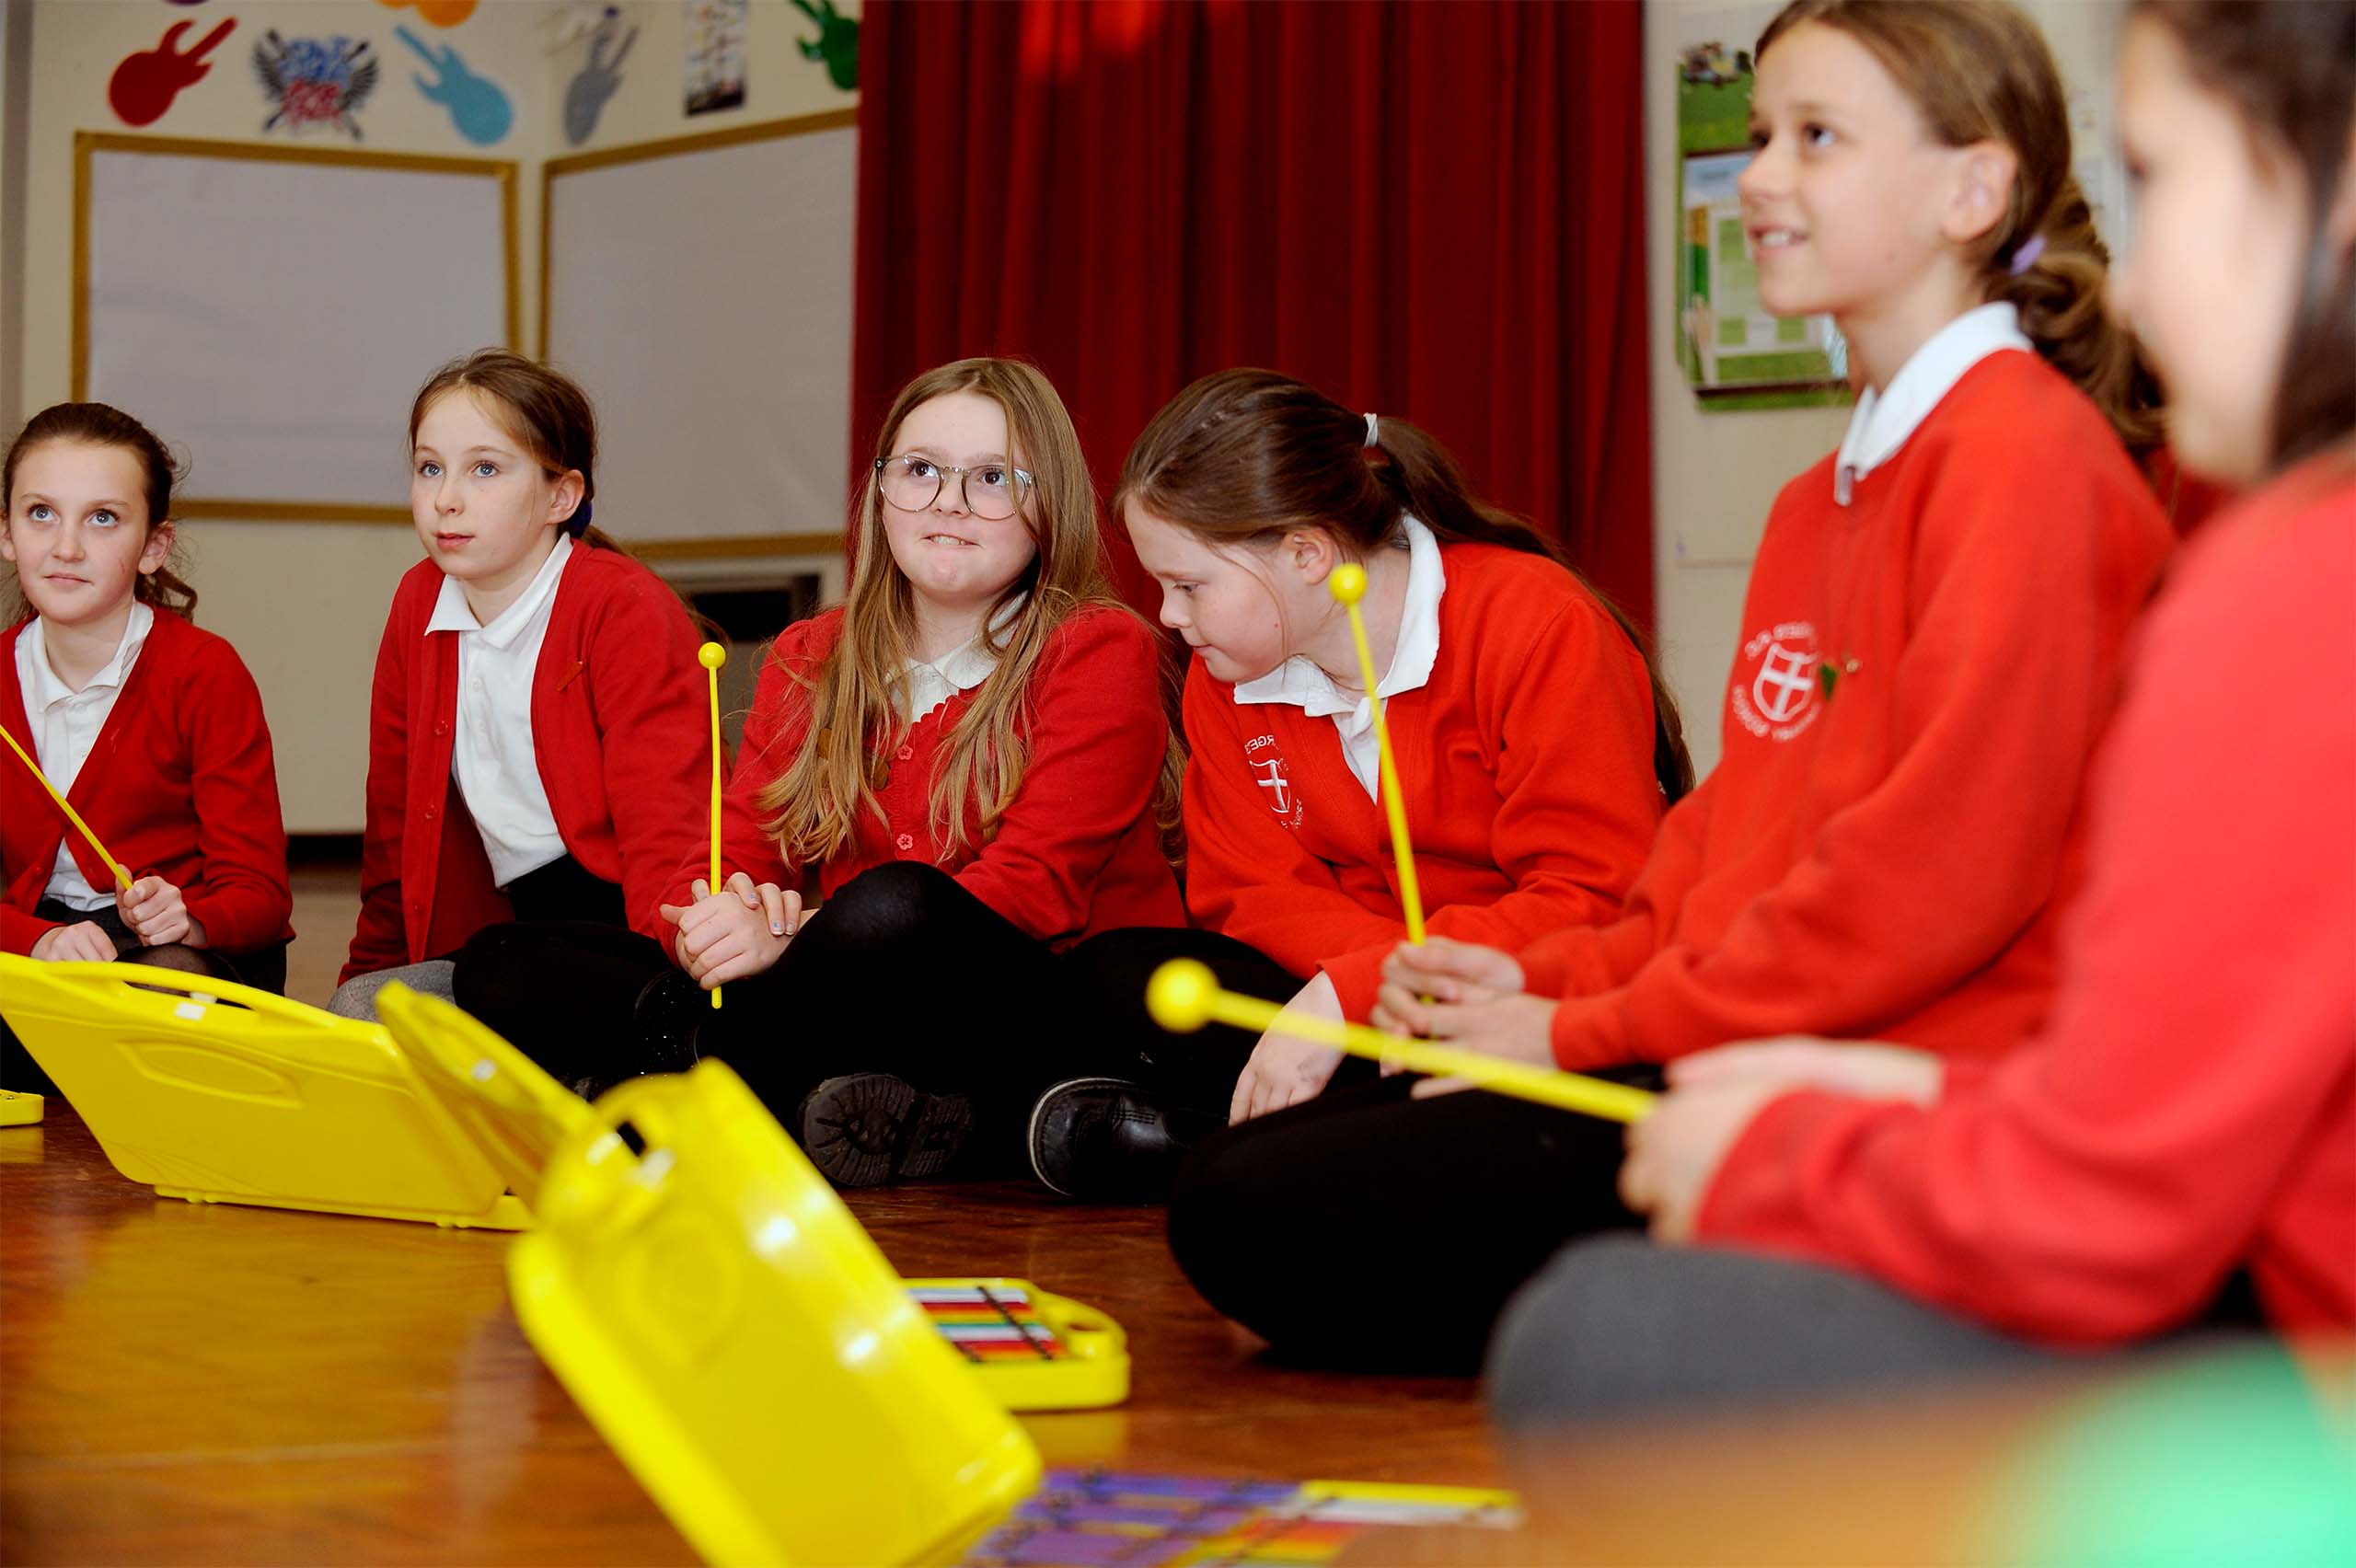 A group of focused schoolchildren in red uniforms are seated on the floor, holding yellow mallets, ready to play the colorful xylophones in front of them, fostering a sense of anticipation and musical collaboration in the classroom.